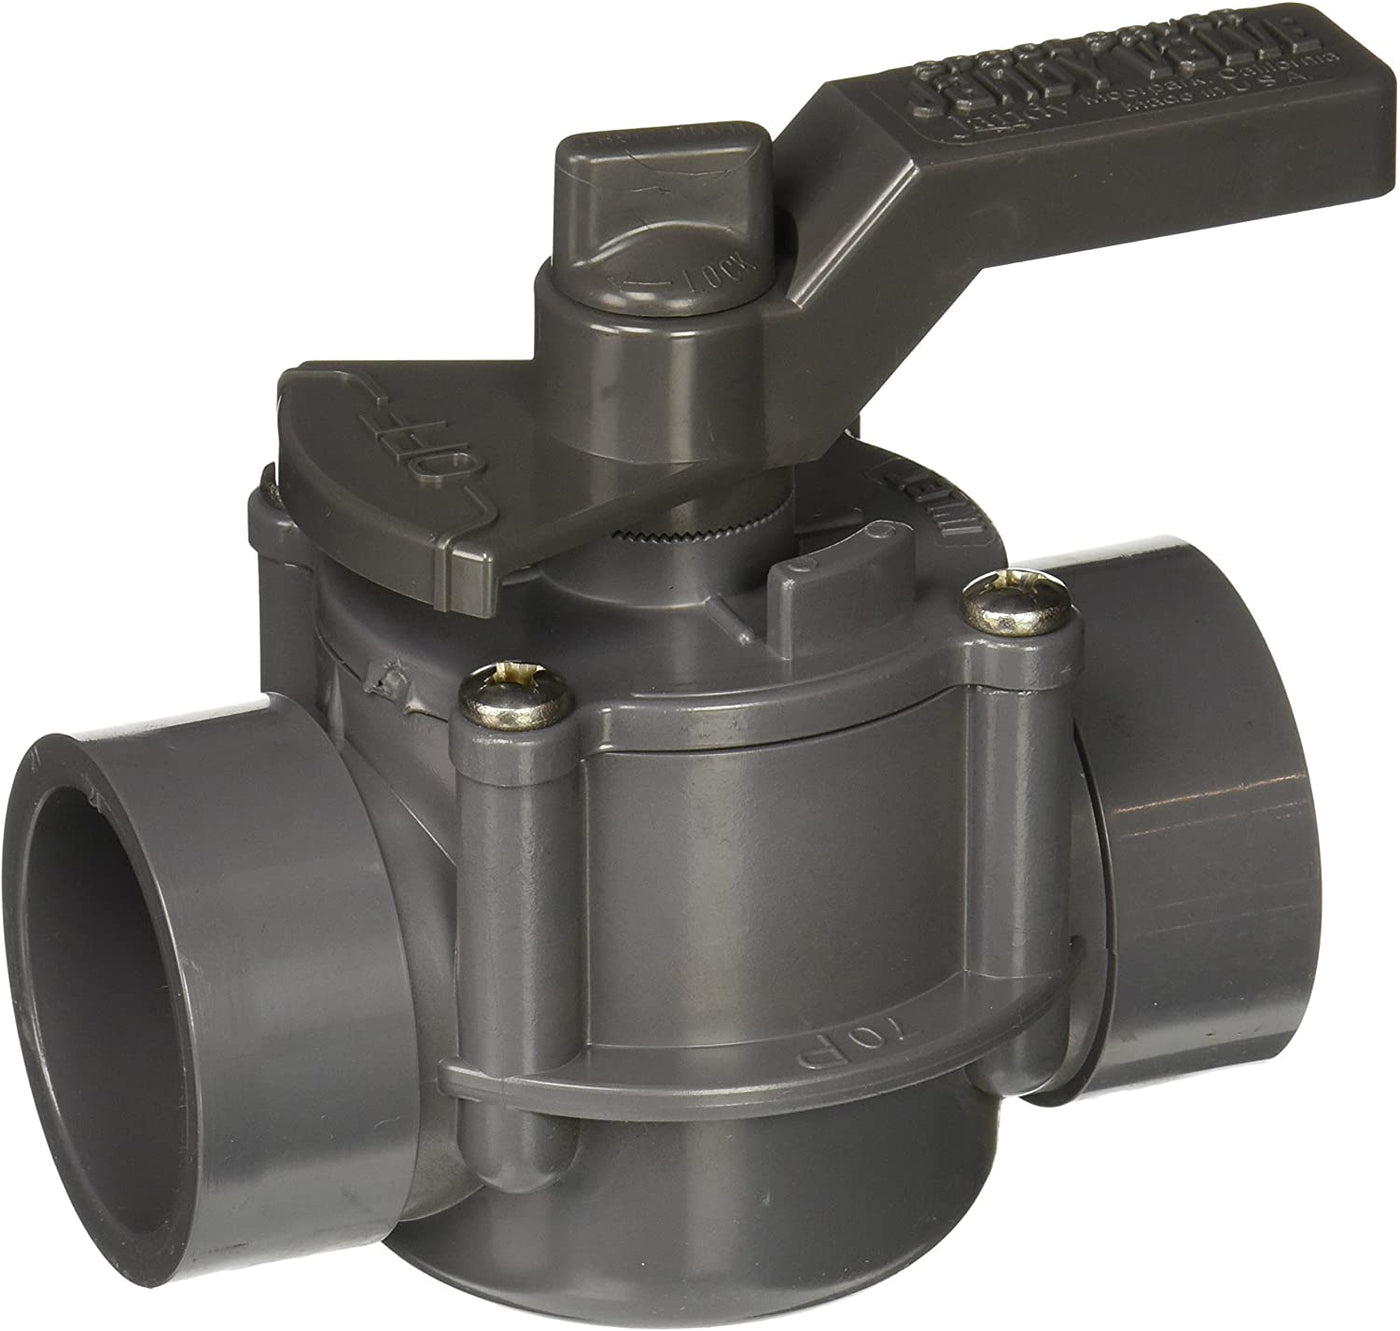 Jandy 3407 Space Saver 2 Port 1-1/2 to 2-Inch Positive Seal Pool/Spa Valve, Gray